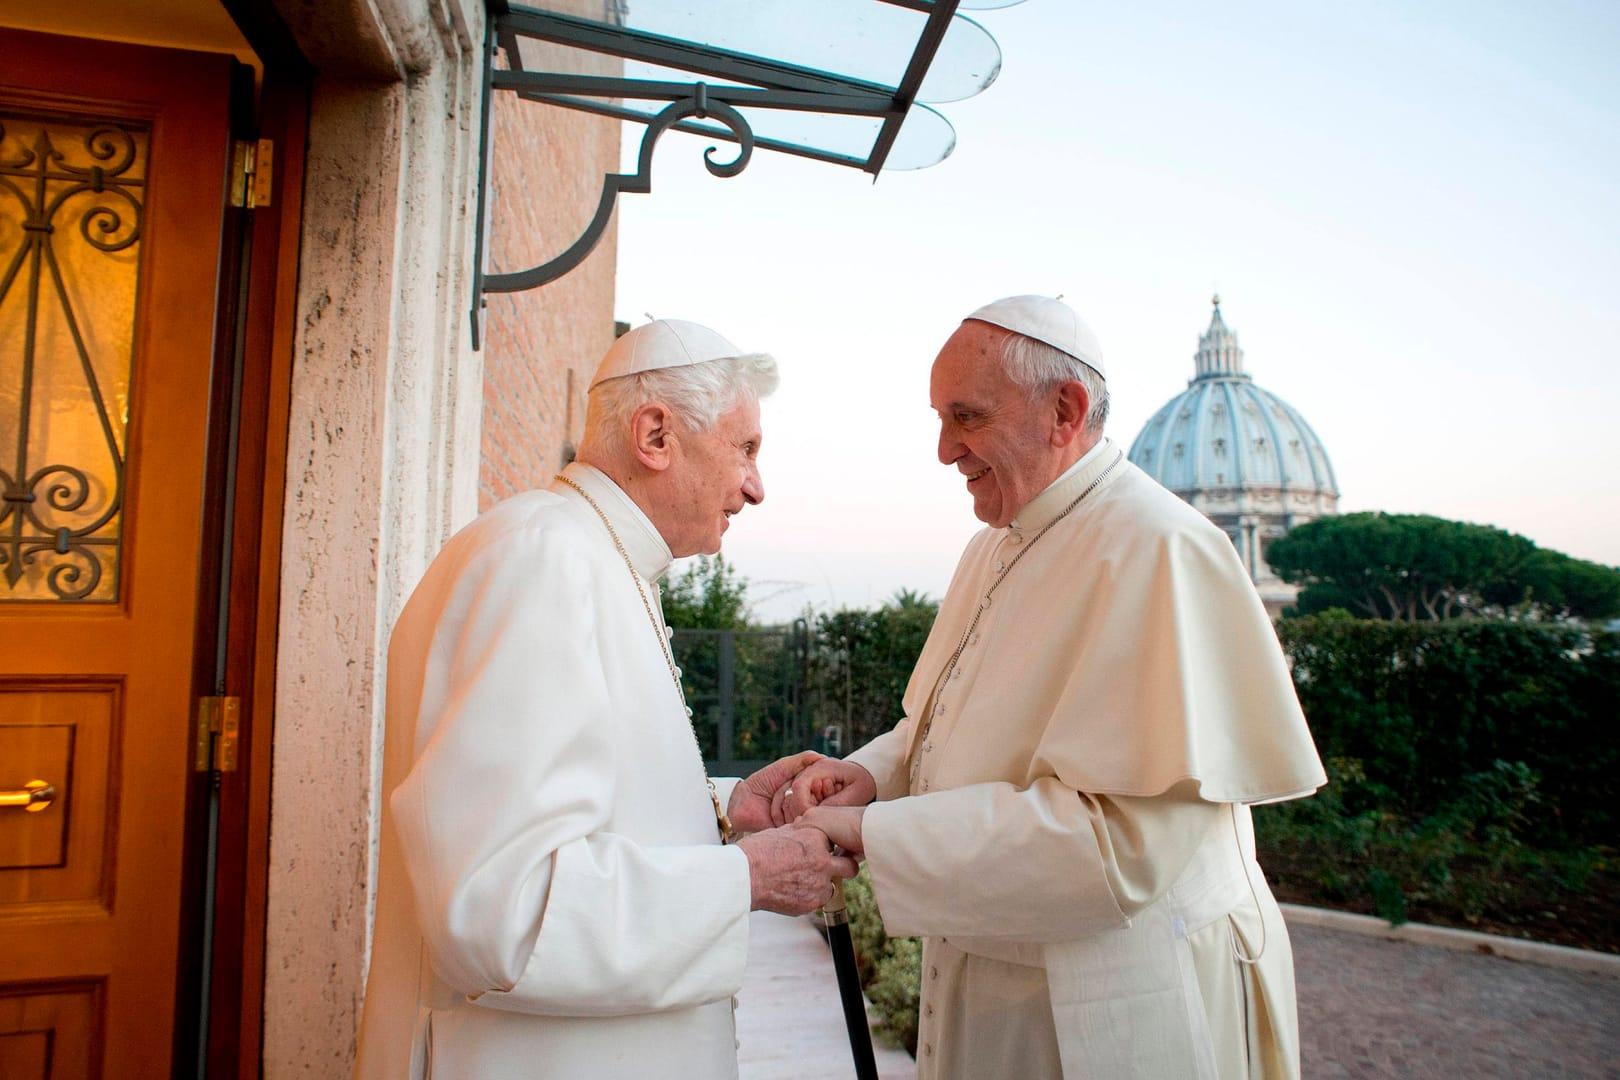 Benedict XVI ‘grateful’ to Pope Francis for year of St. Joseph